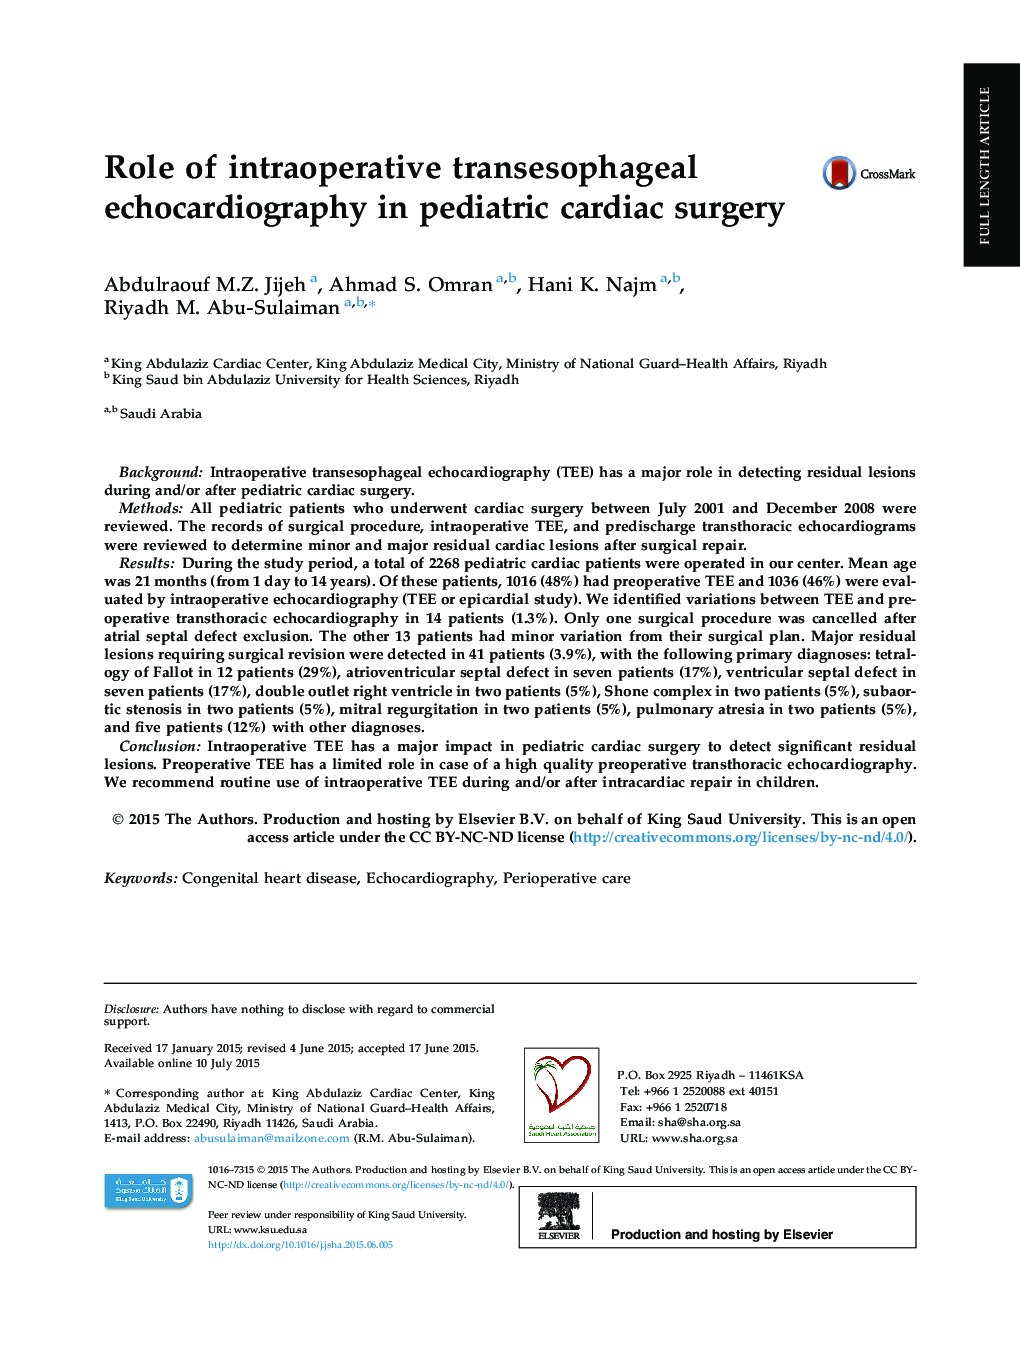 Role of intraoperative transesophageal echocardiography in pediatric cardiac surgery 